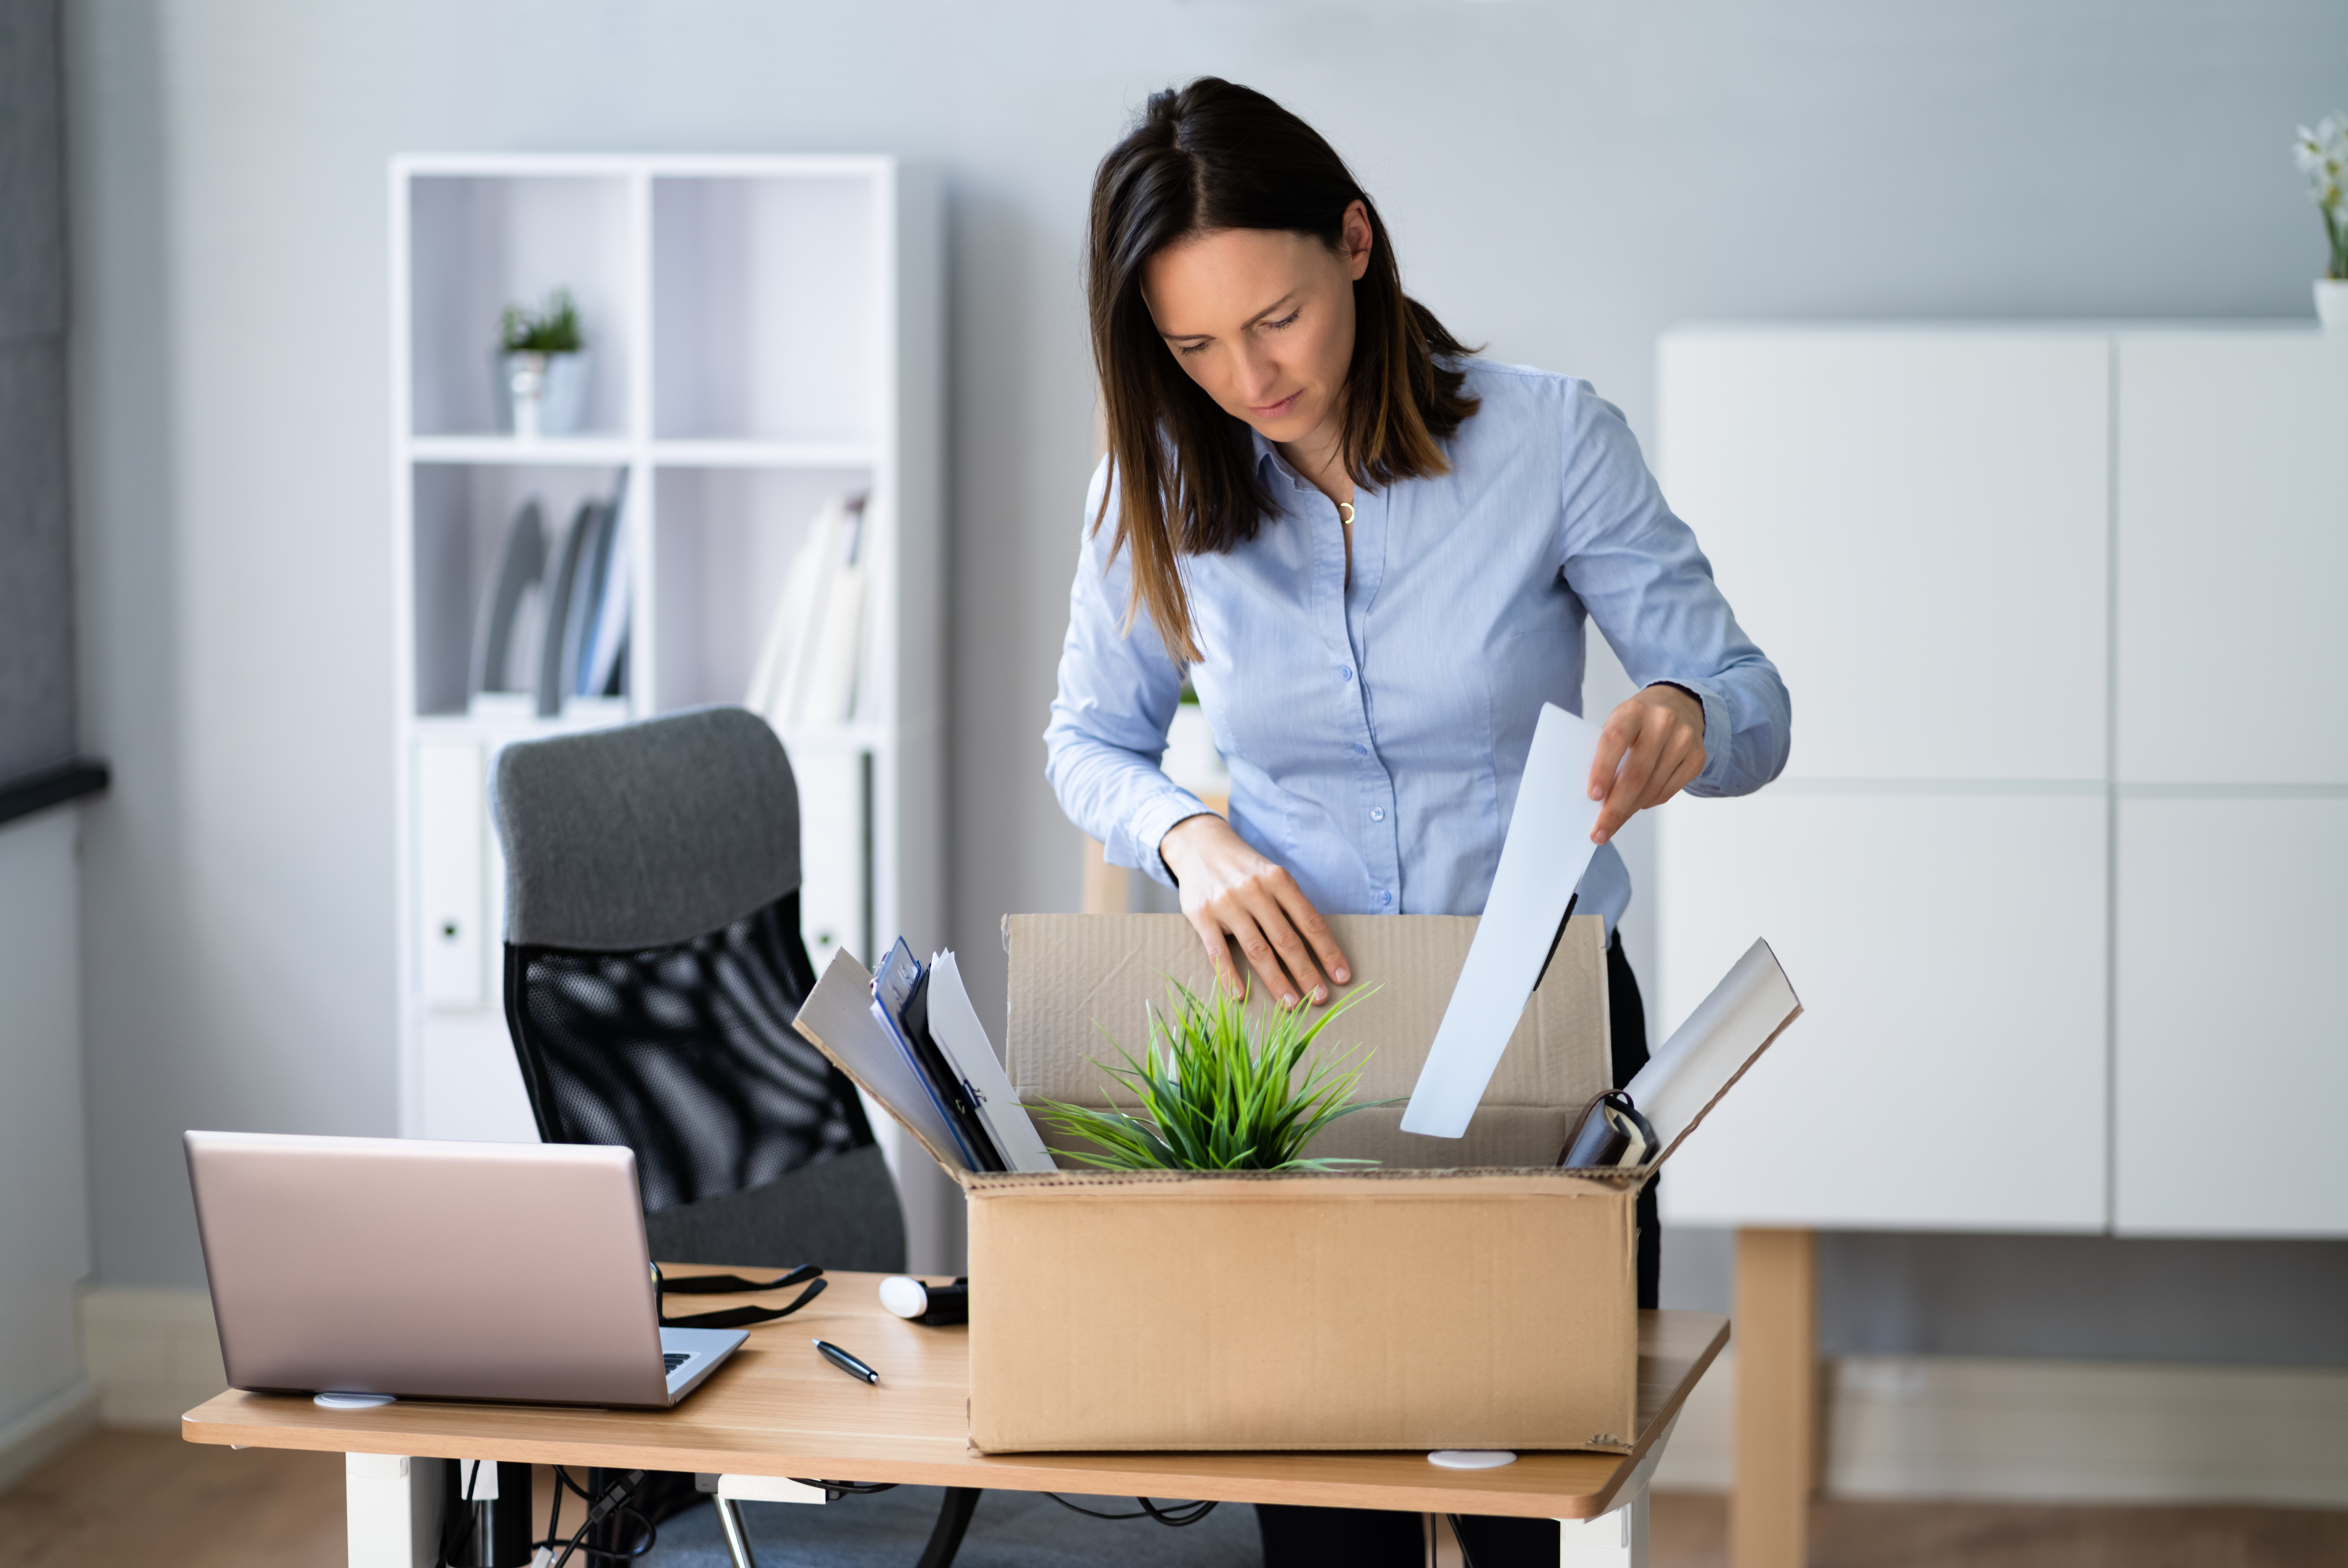 Female employee packing all her things to move out